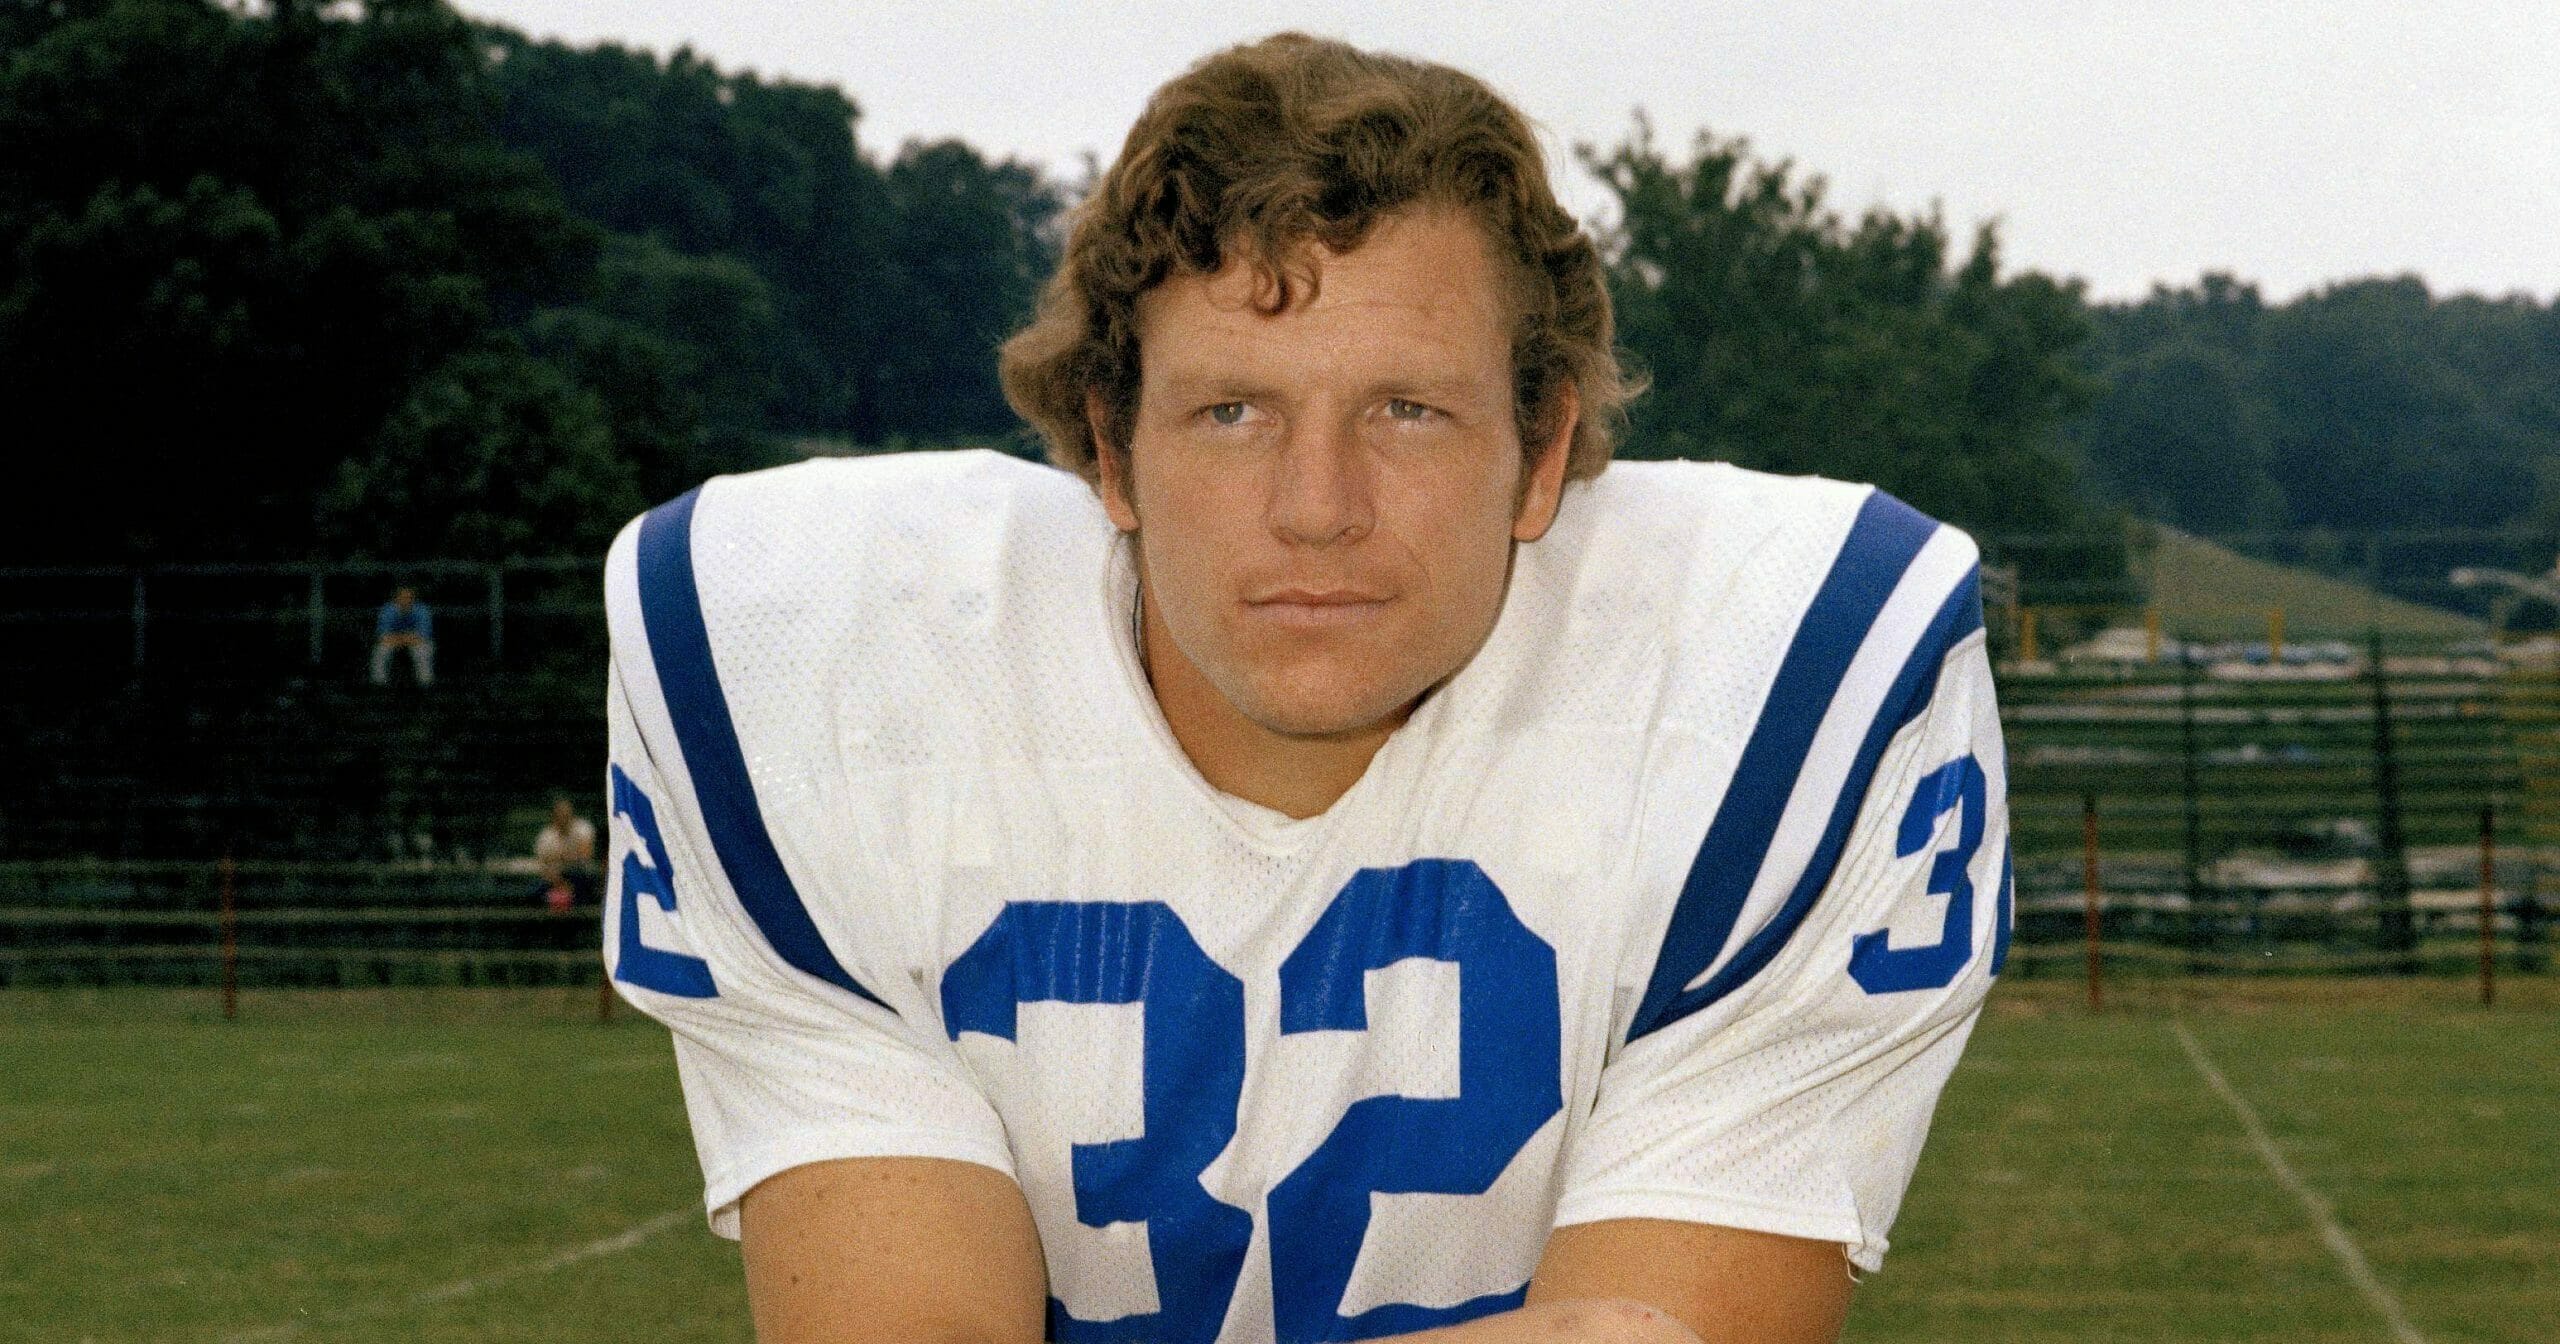 This is a 1973 file photo showing Baltimore Colts NFL football player Mike Curtis. Curtis, a hard-hitting, no-nonsense linebacker who helped the Colts win a Super Bowl during a 14-year career spent predominantly in Baltimore, died April 20, 2020, in St. Petersburg, Florida. He was 77.